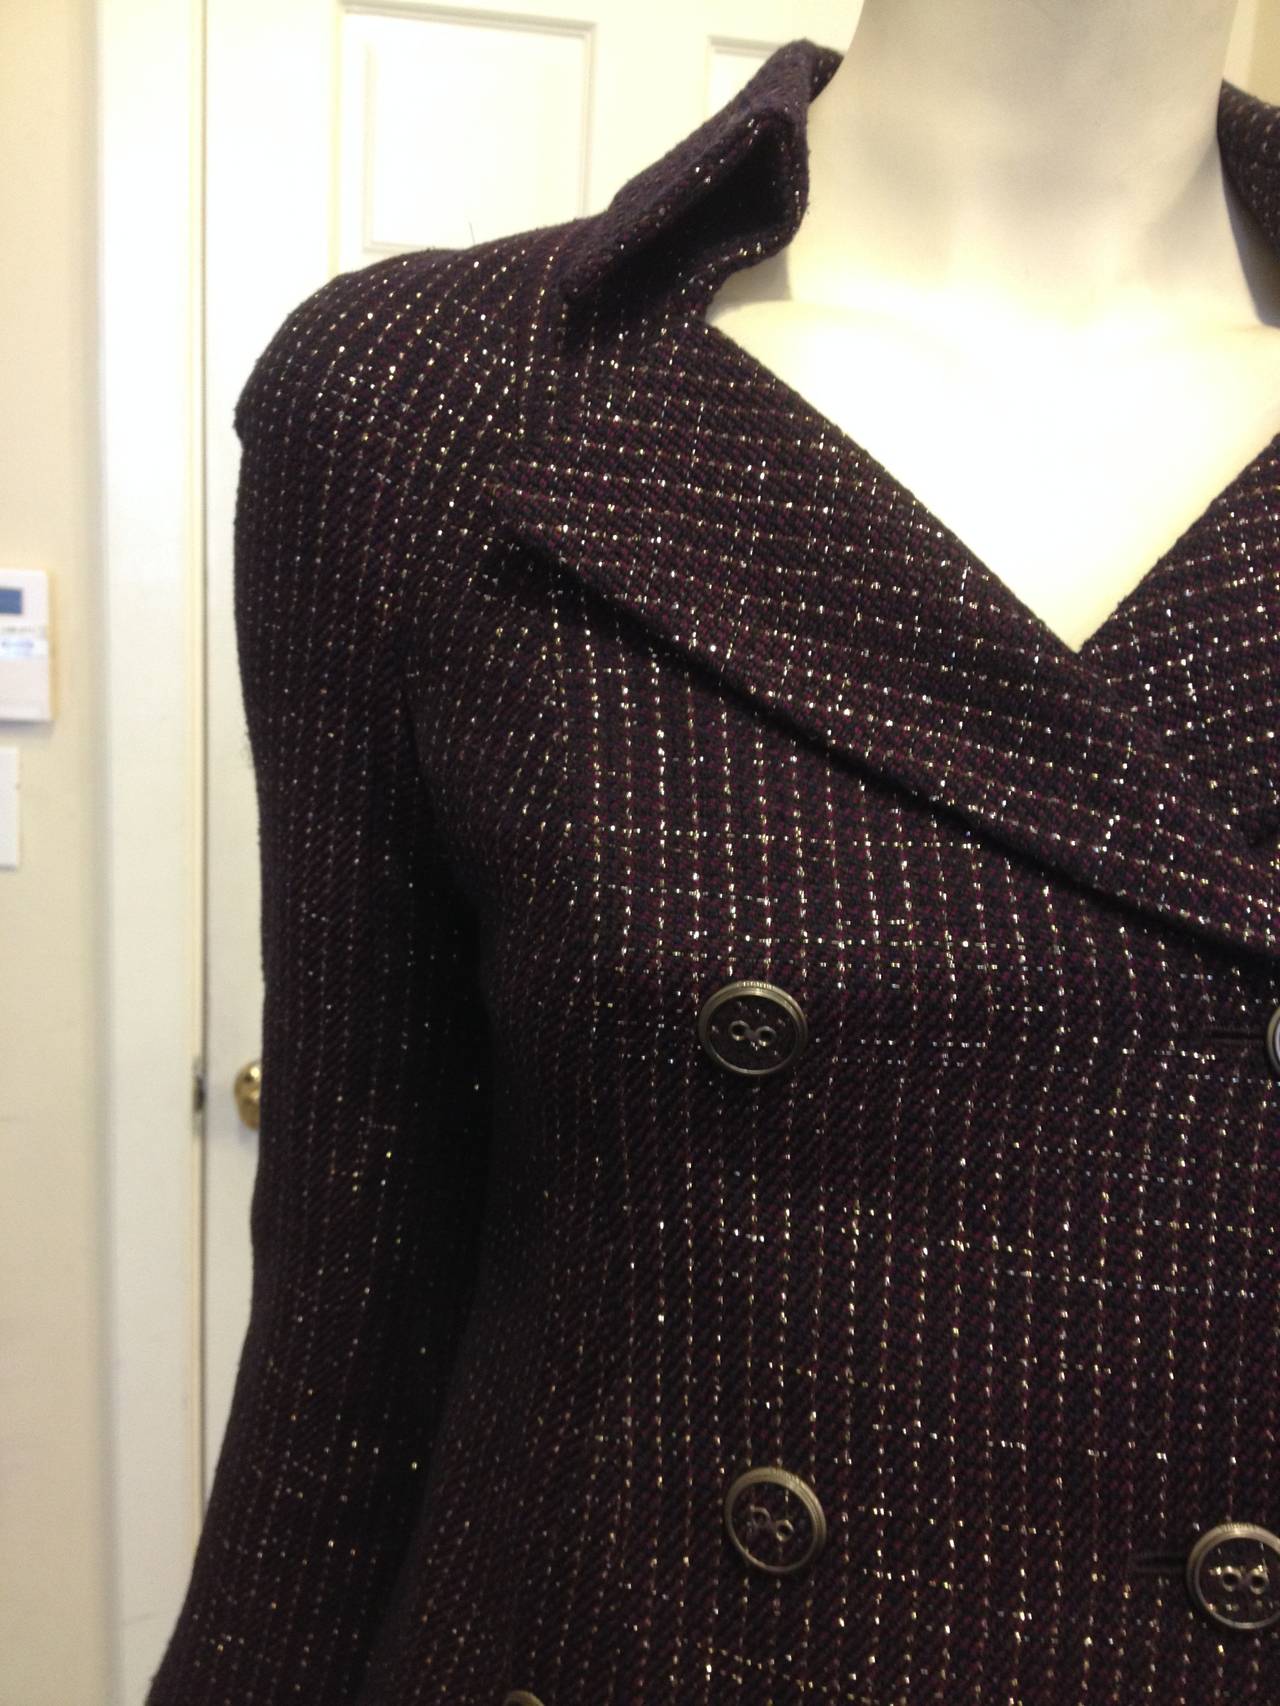 Such a deeply elegant piece - in a jewel-toned plum color woven throughout with navy and metallic gold threads, this jacket is perfect. The inky, saturated color is dressy and polished, while the cut is beautifully tailored and styled. The higher